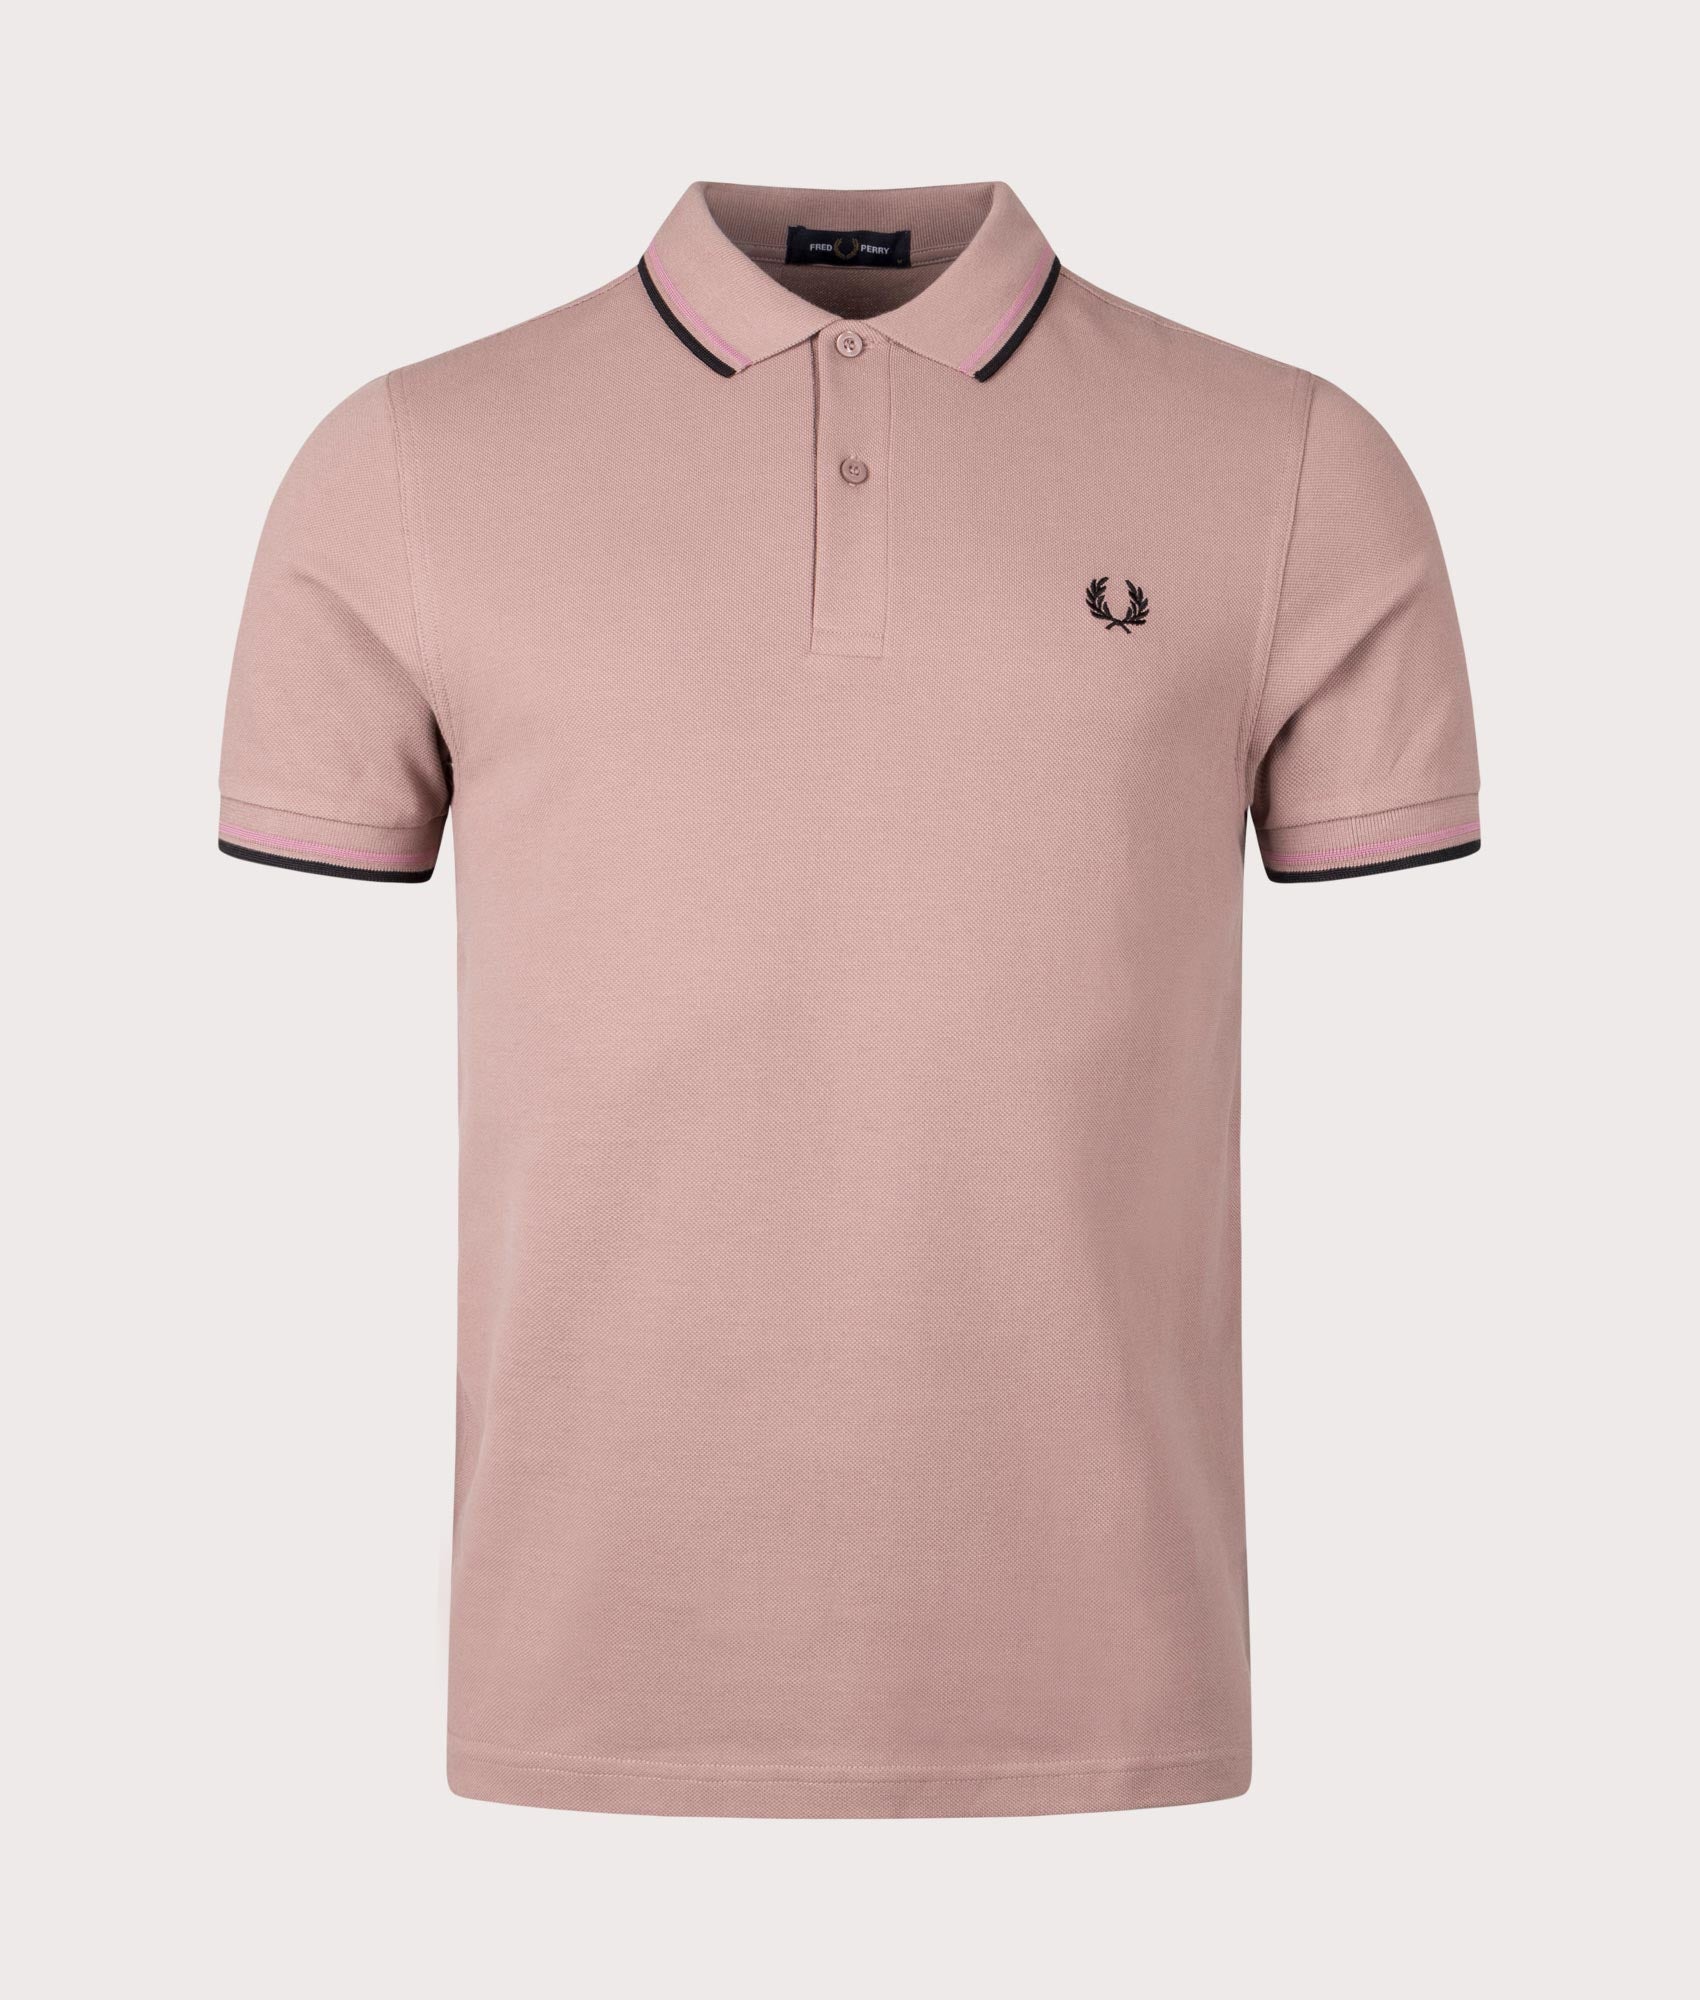 Fred Perry Mens Twin Tipped Fred Perry Polo Shirt - Colour: U89 Dark Pink/Dusty Rose/Black - Size: L